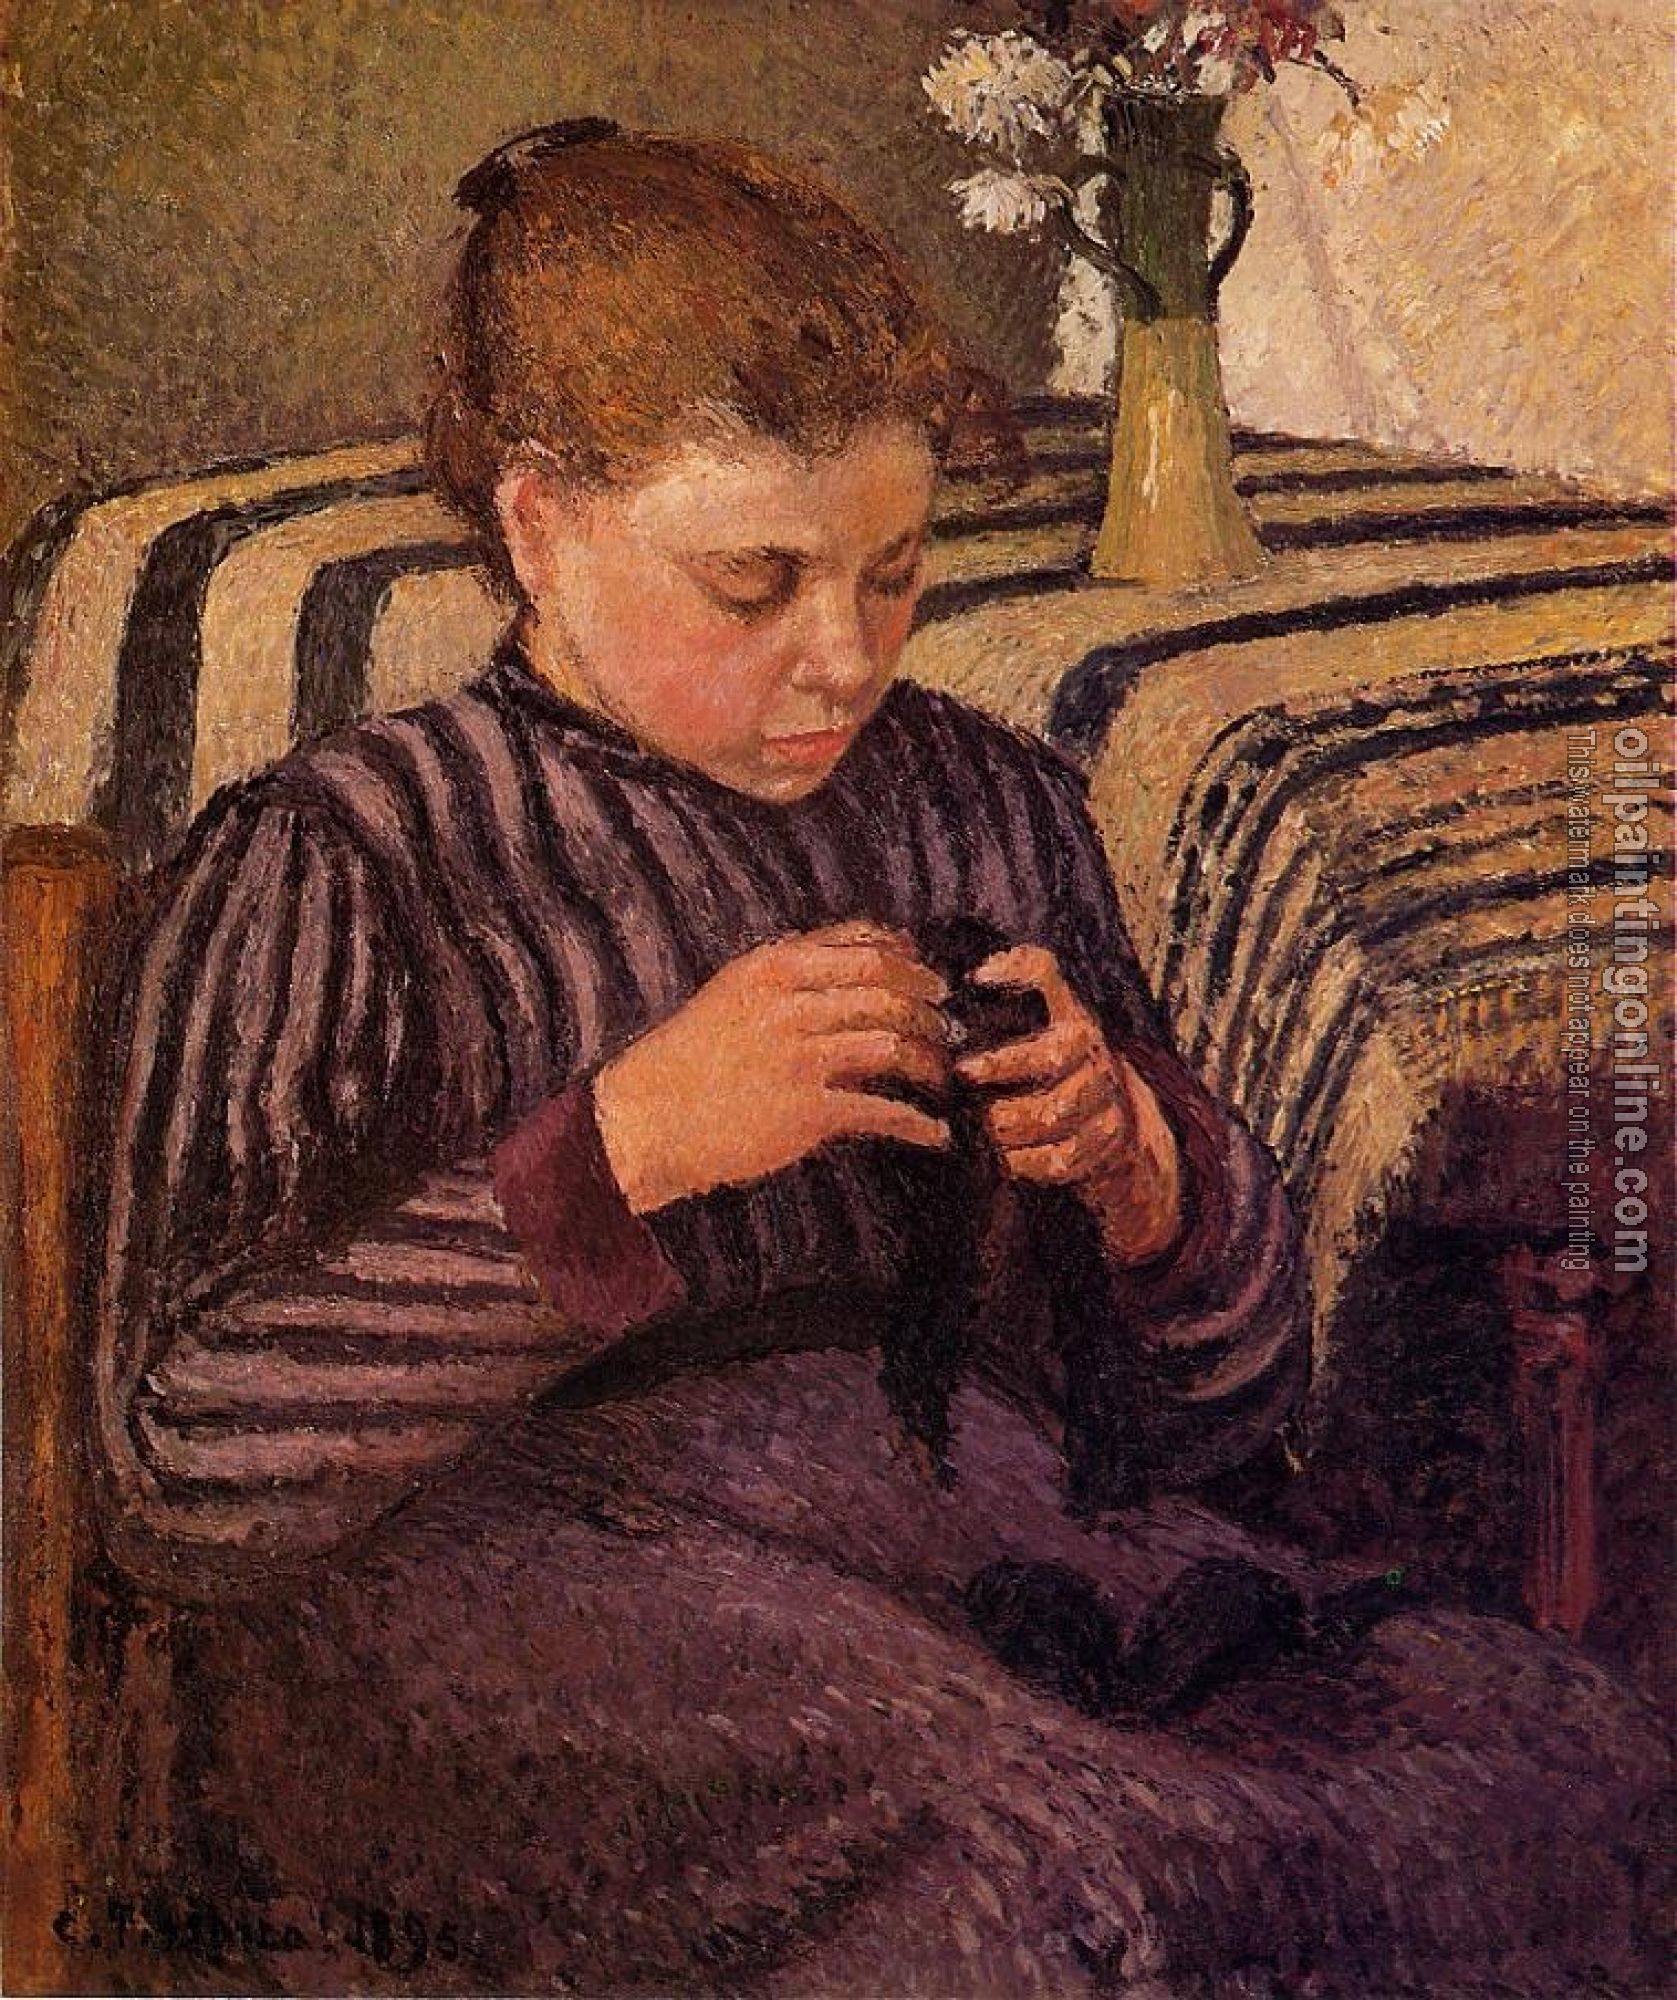 Pissarro, Camille - Young Girl Mending Her Stockings